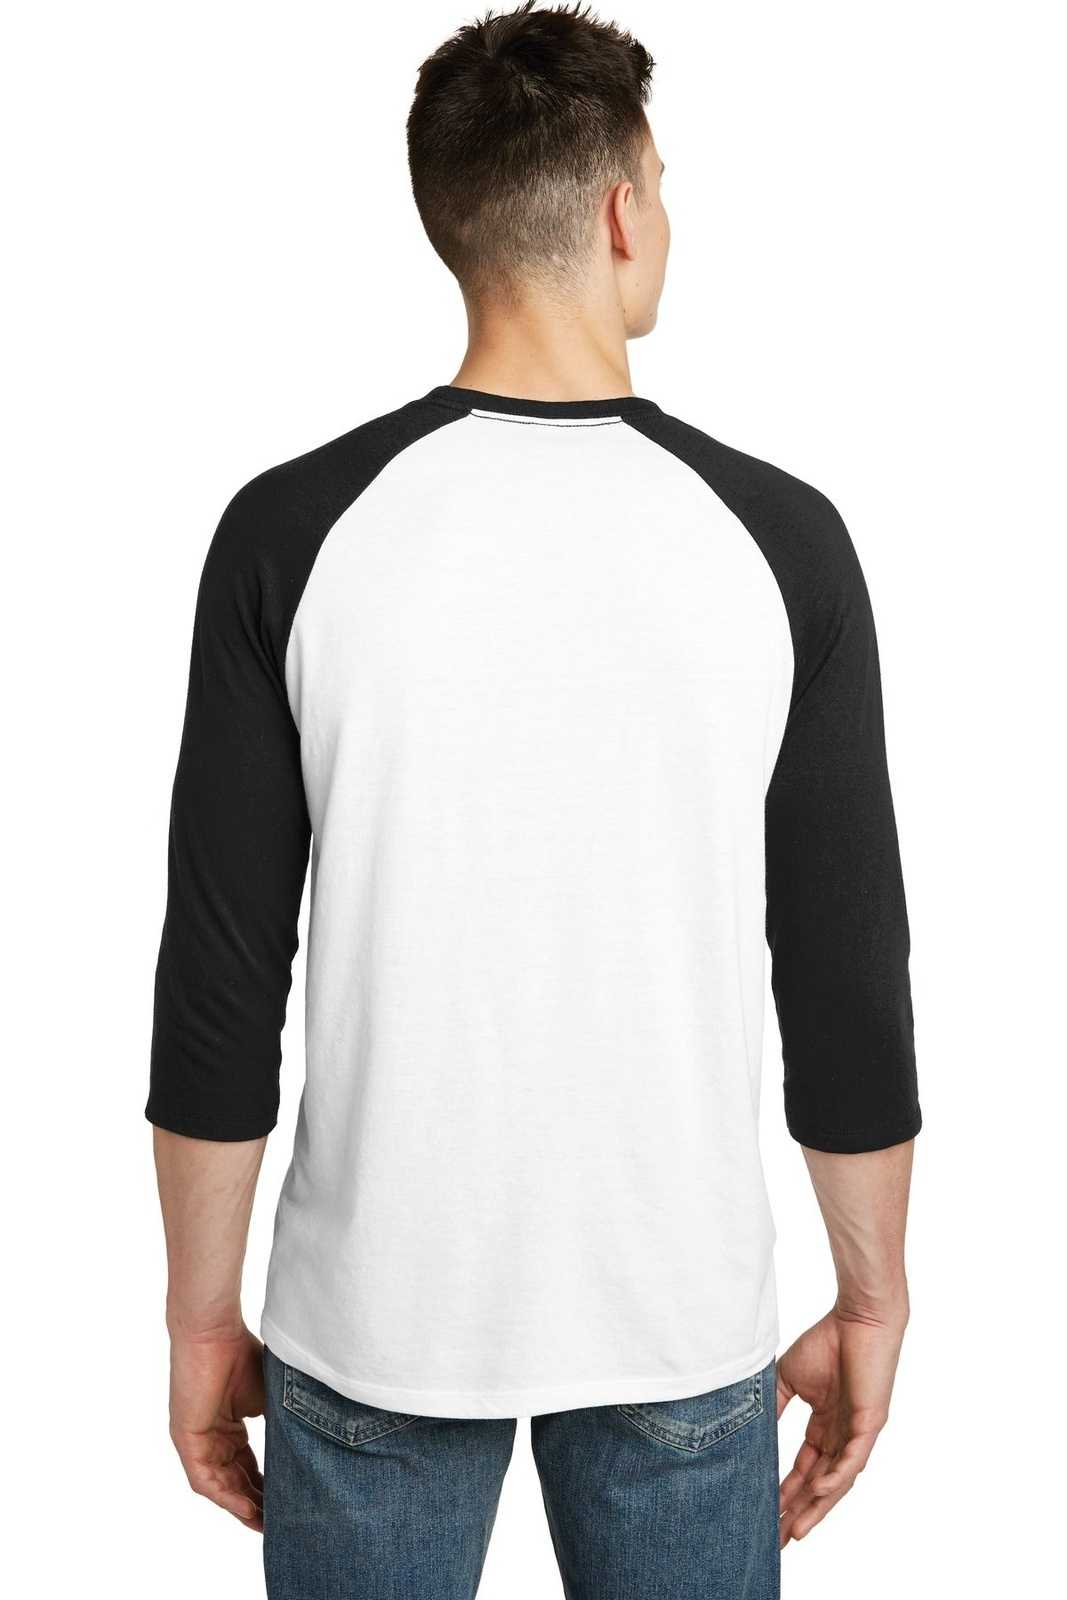 District DT6210 Very Important Tee 3/4-Sleeve Raglan - Black White - HIT a Double - 1